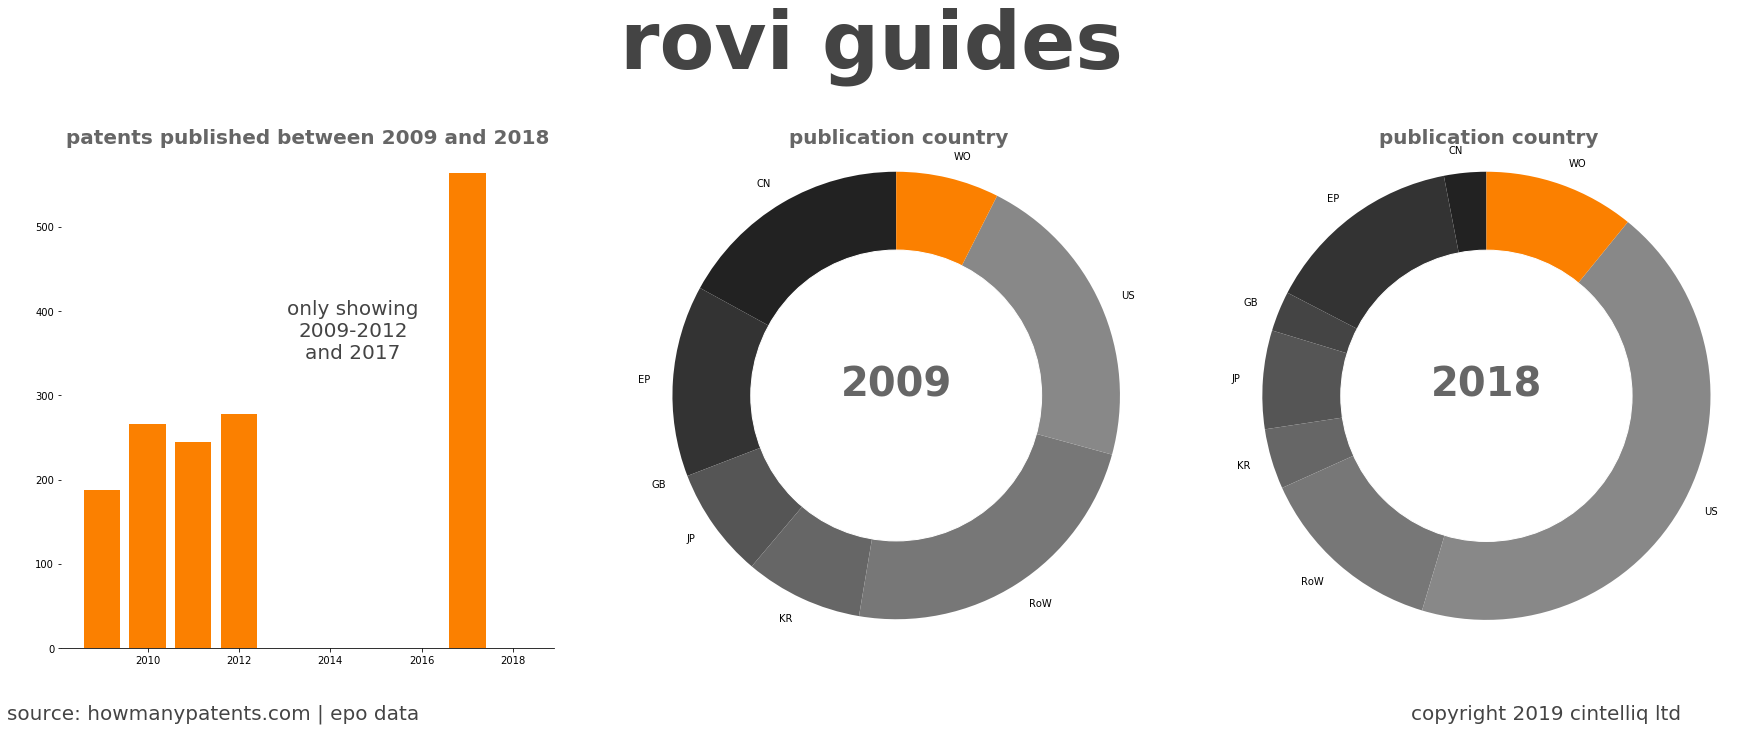 summary of patents for Rovi Guides